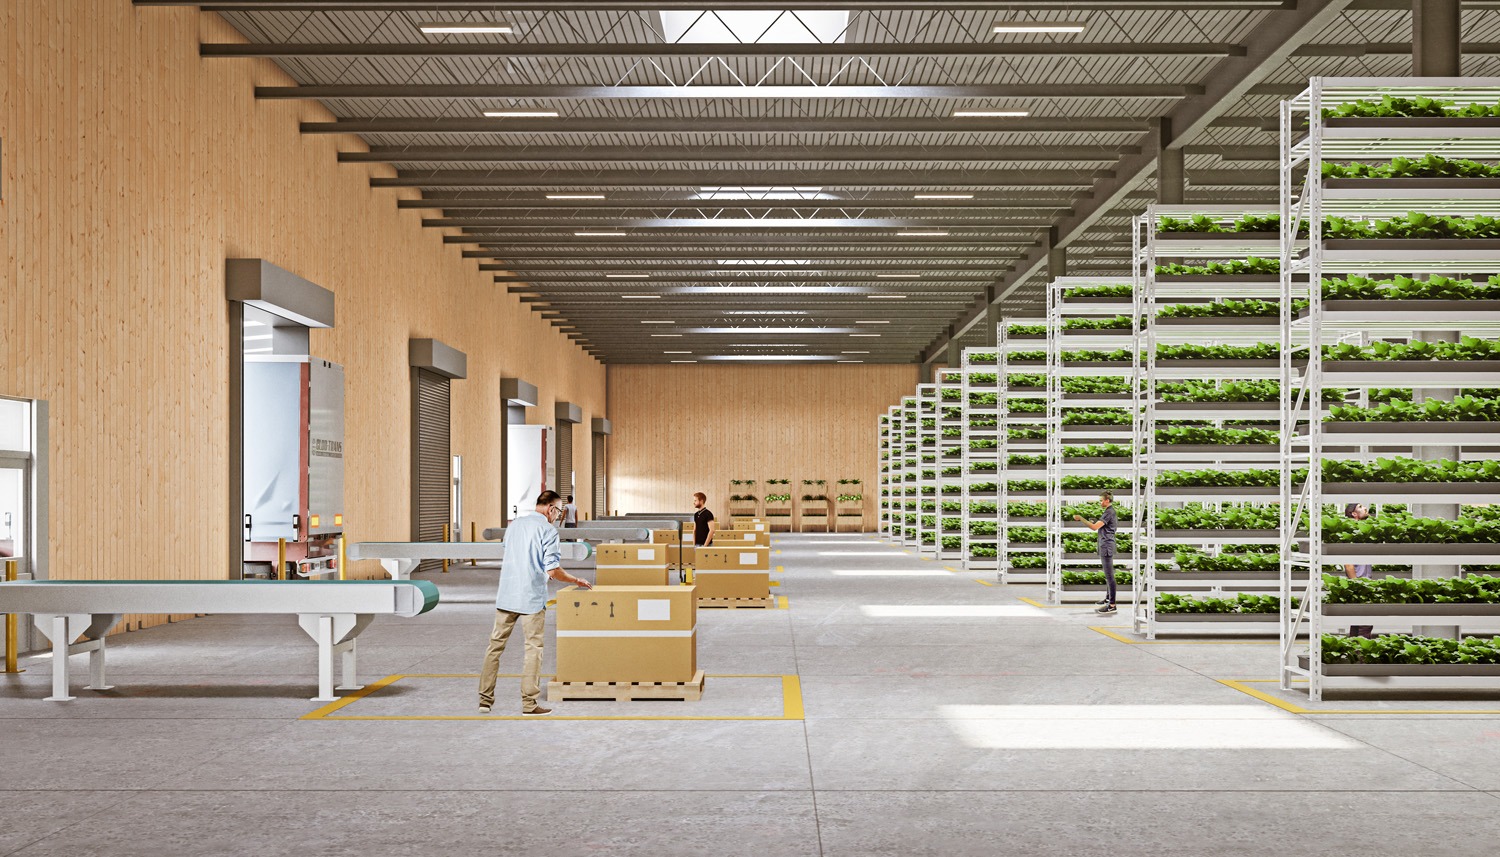 A 3d rendering of a large warehouse building with metal framing and wood timbers walls.